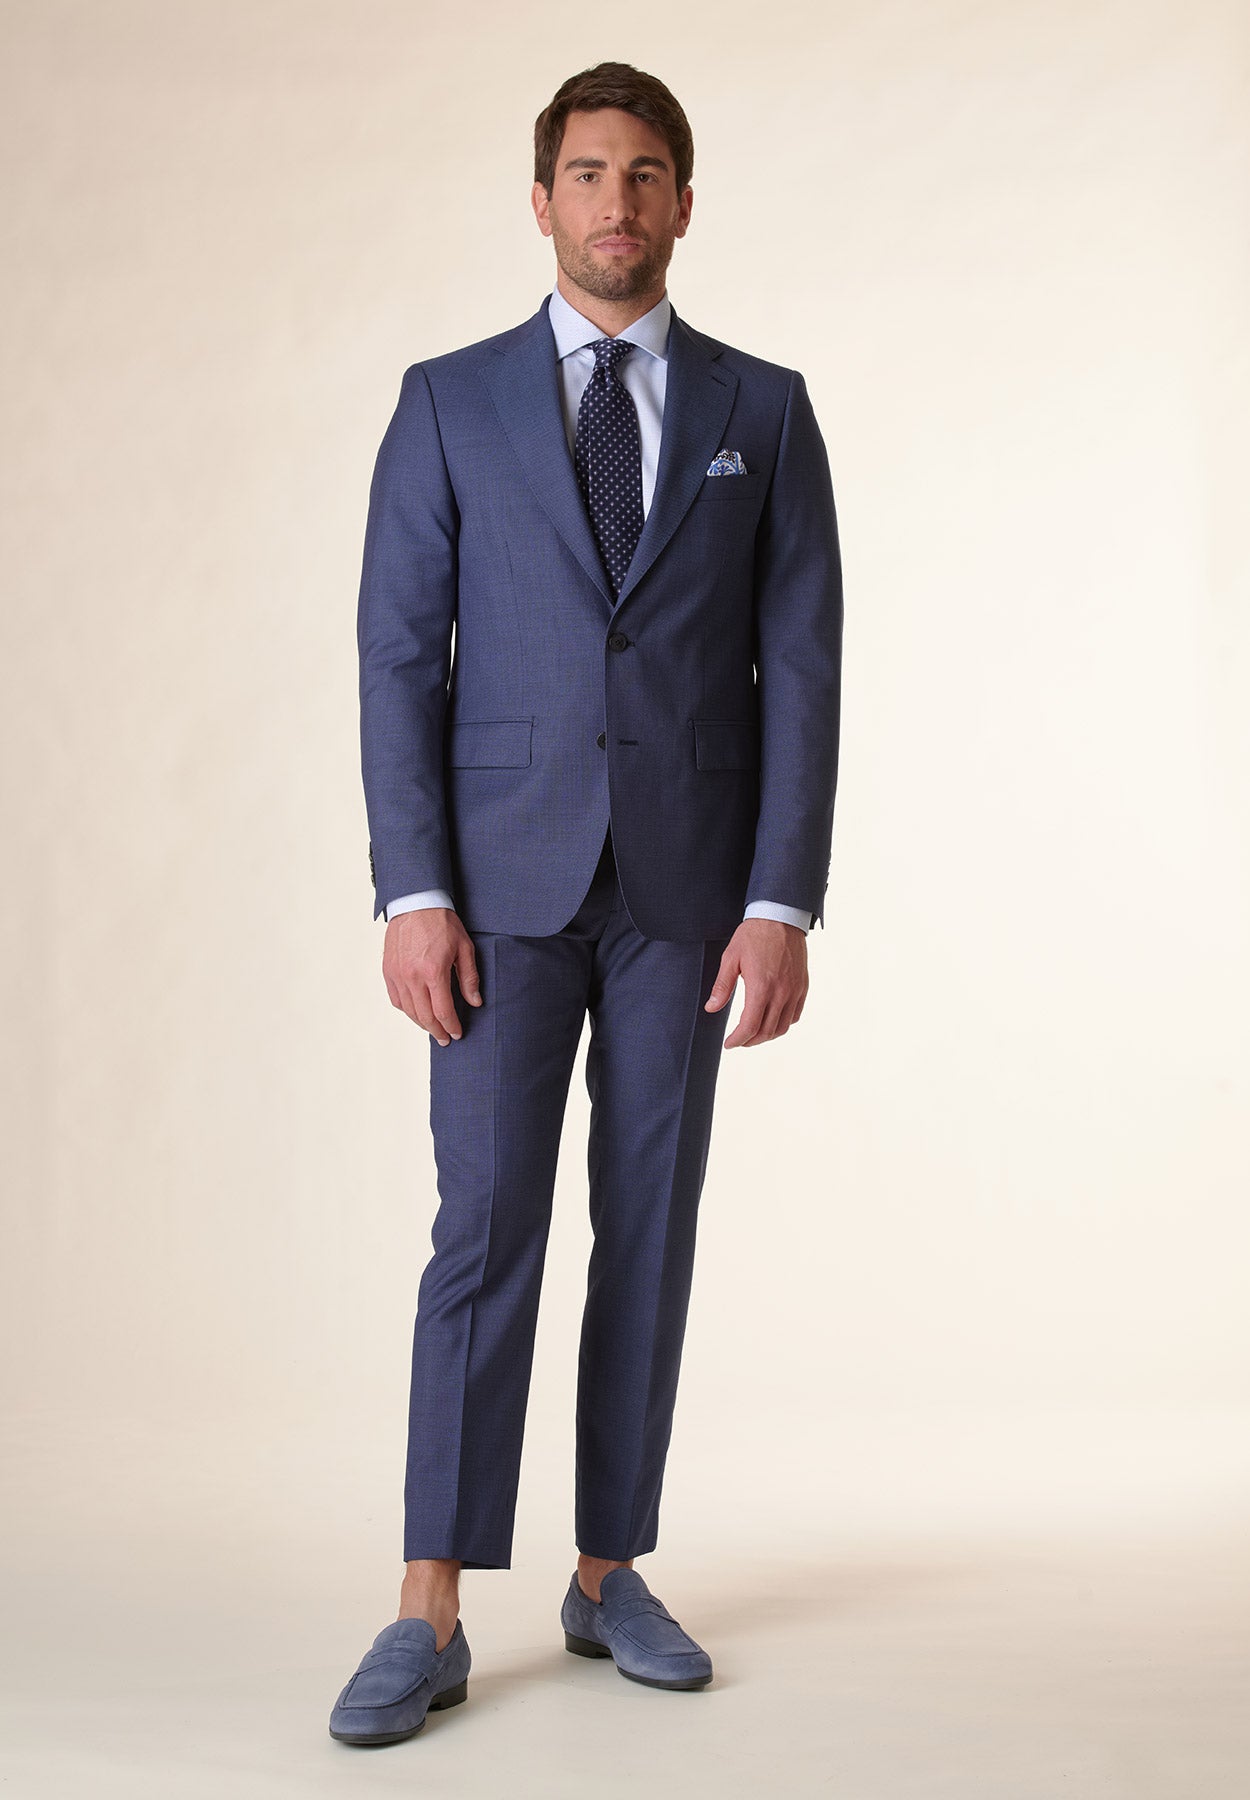 Angelico - Heather Blue Suit For Men